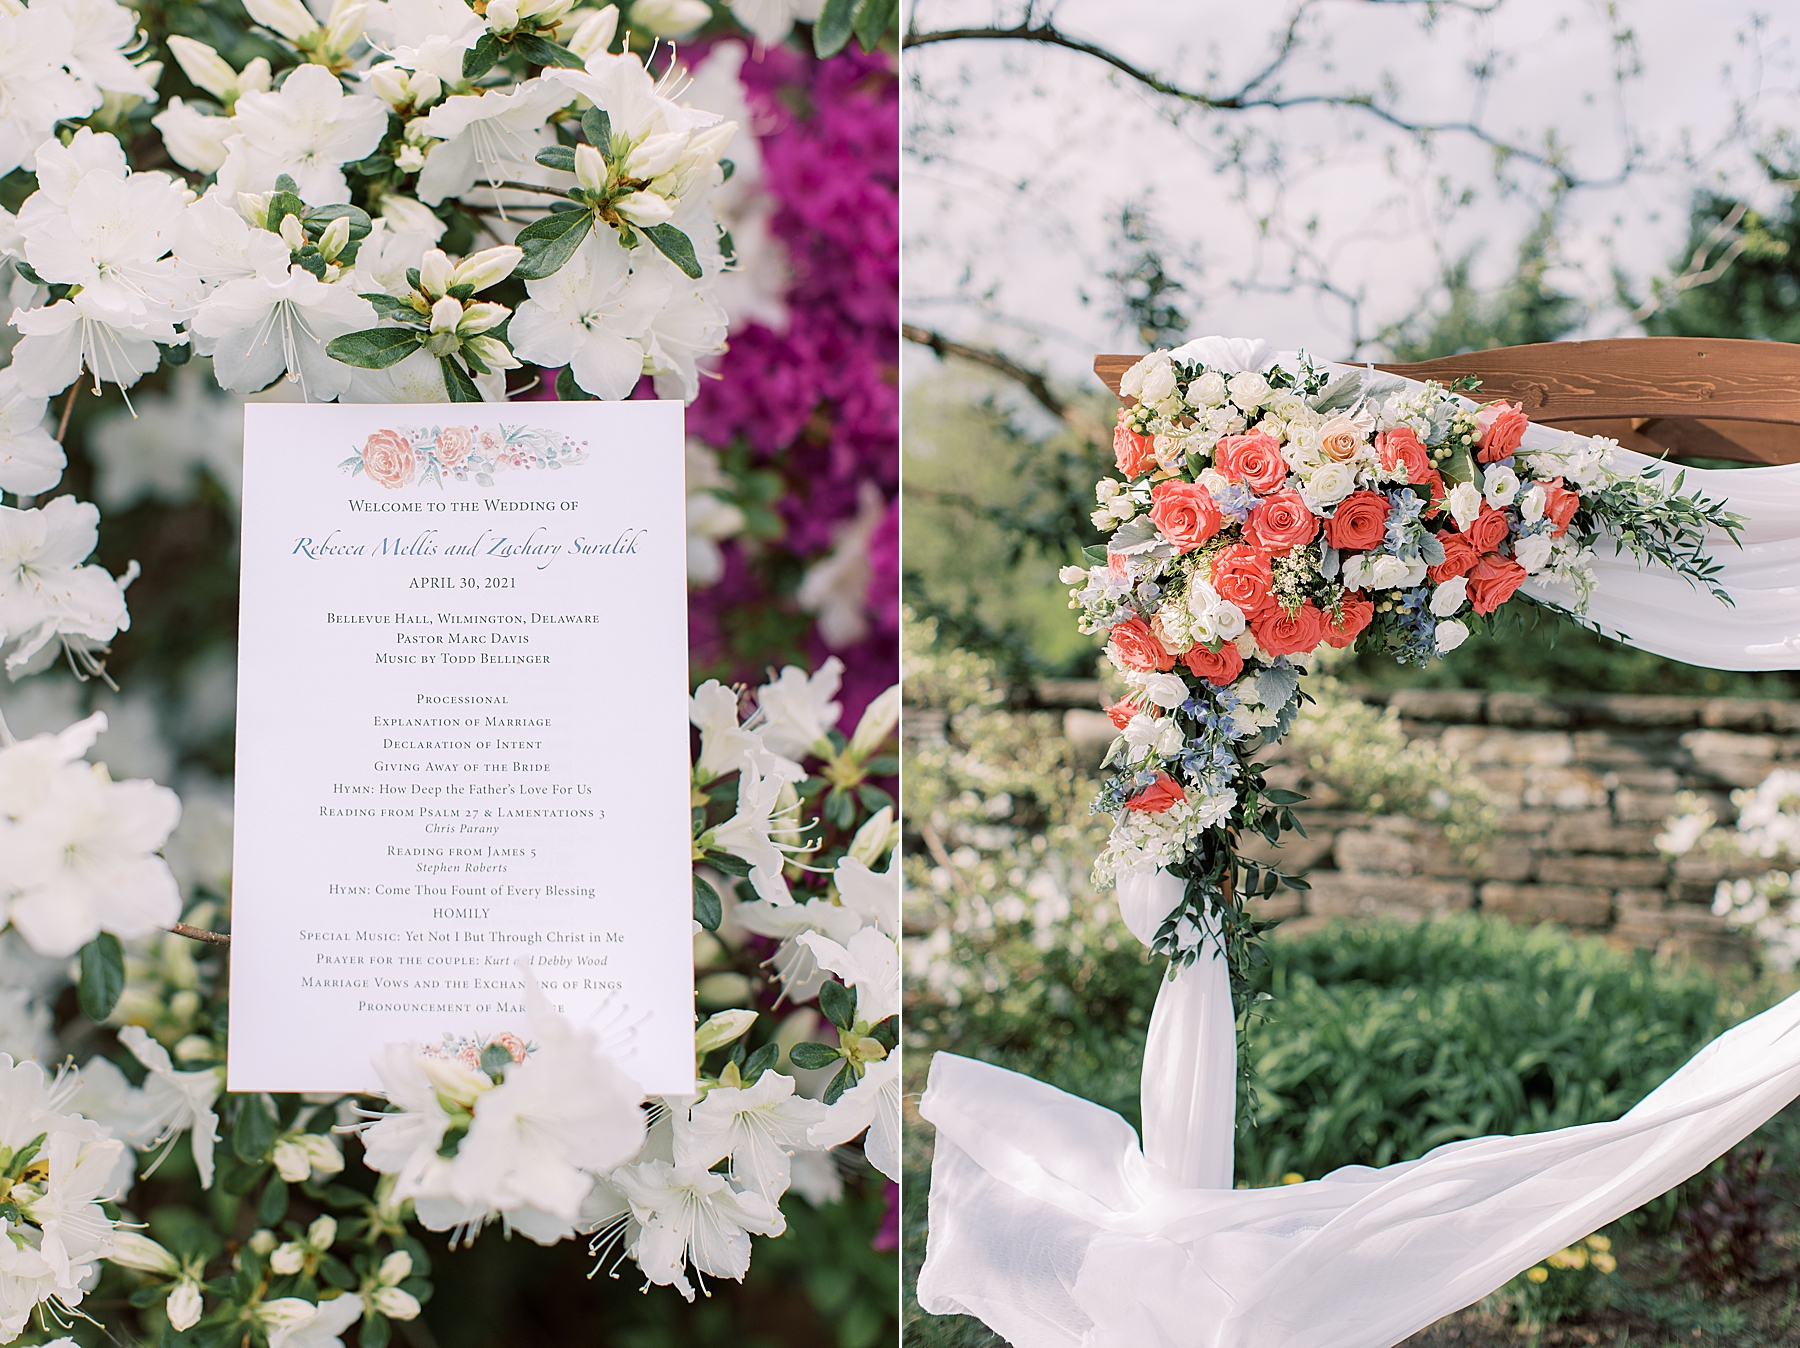 ceremony program and arbor with pink and white roses for Bellevue Hall wedding 